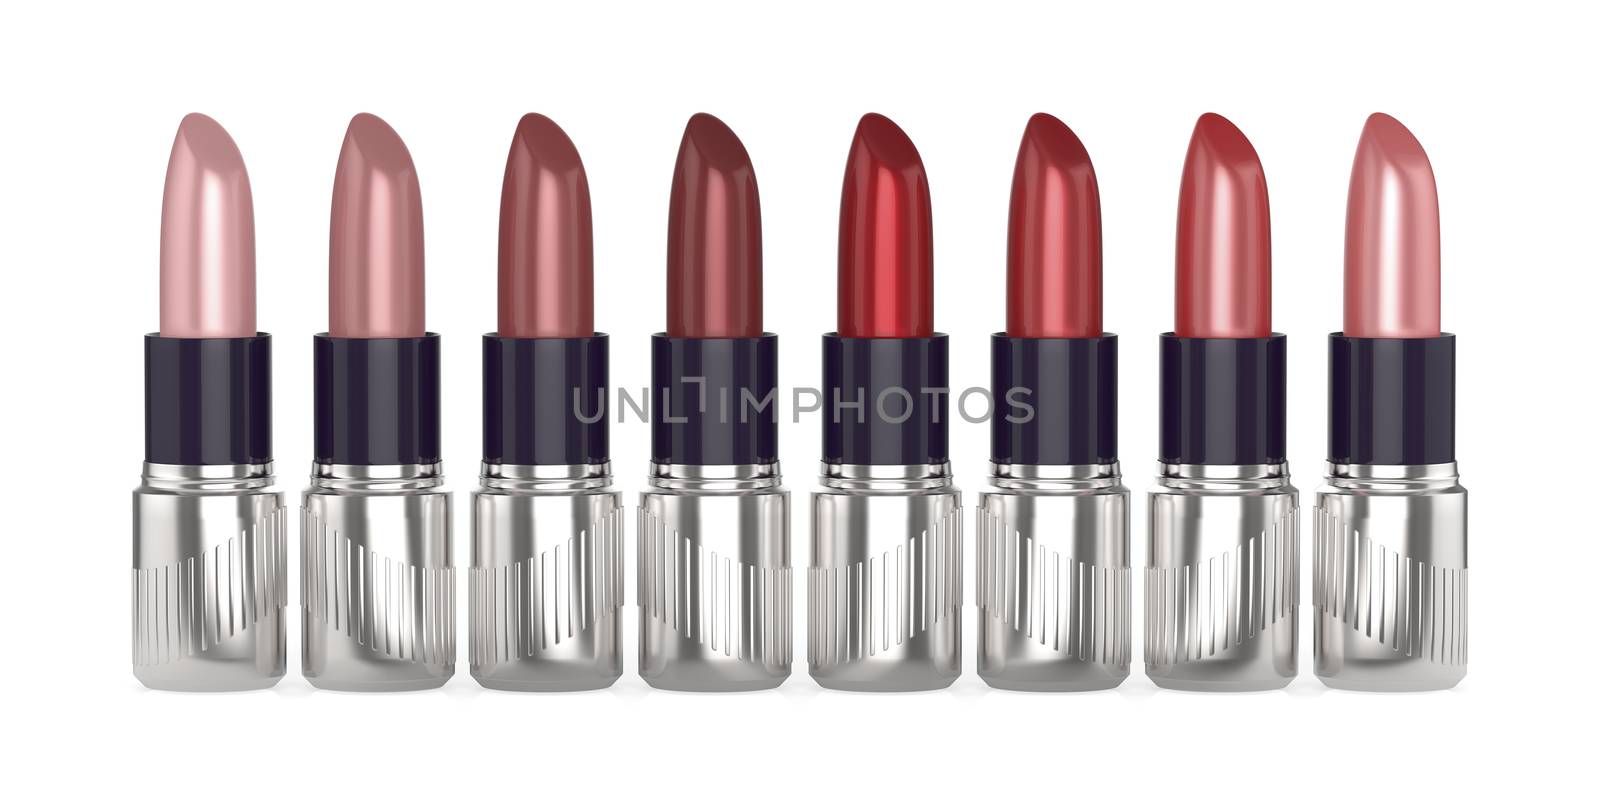 Lipsticks by magraphics